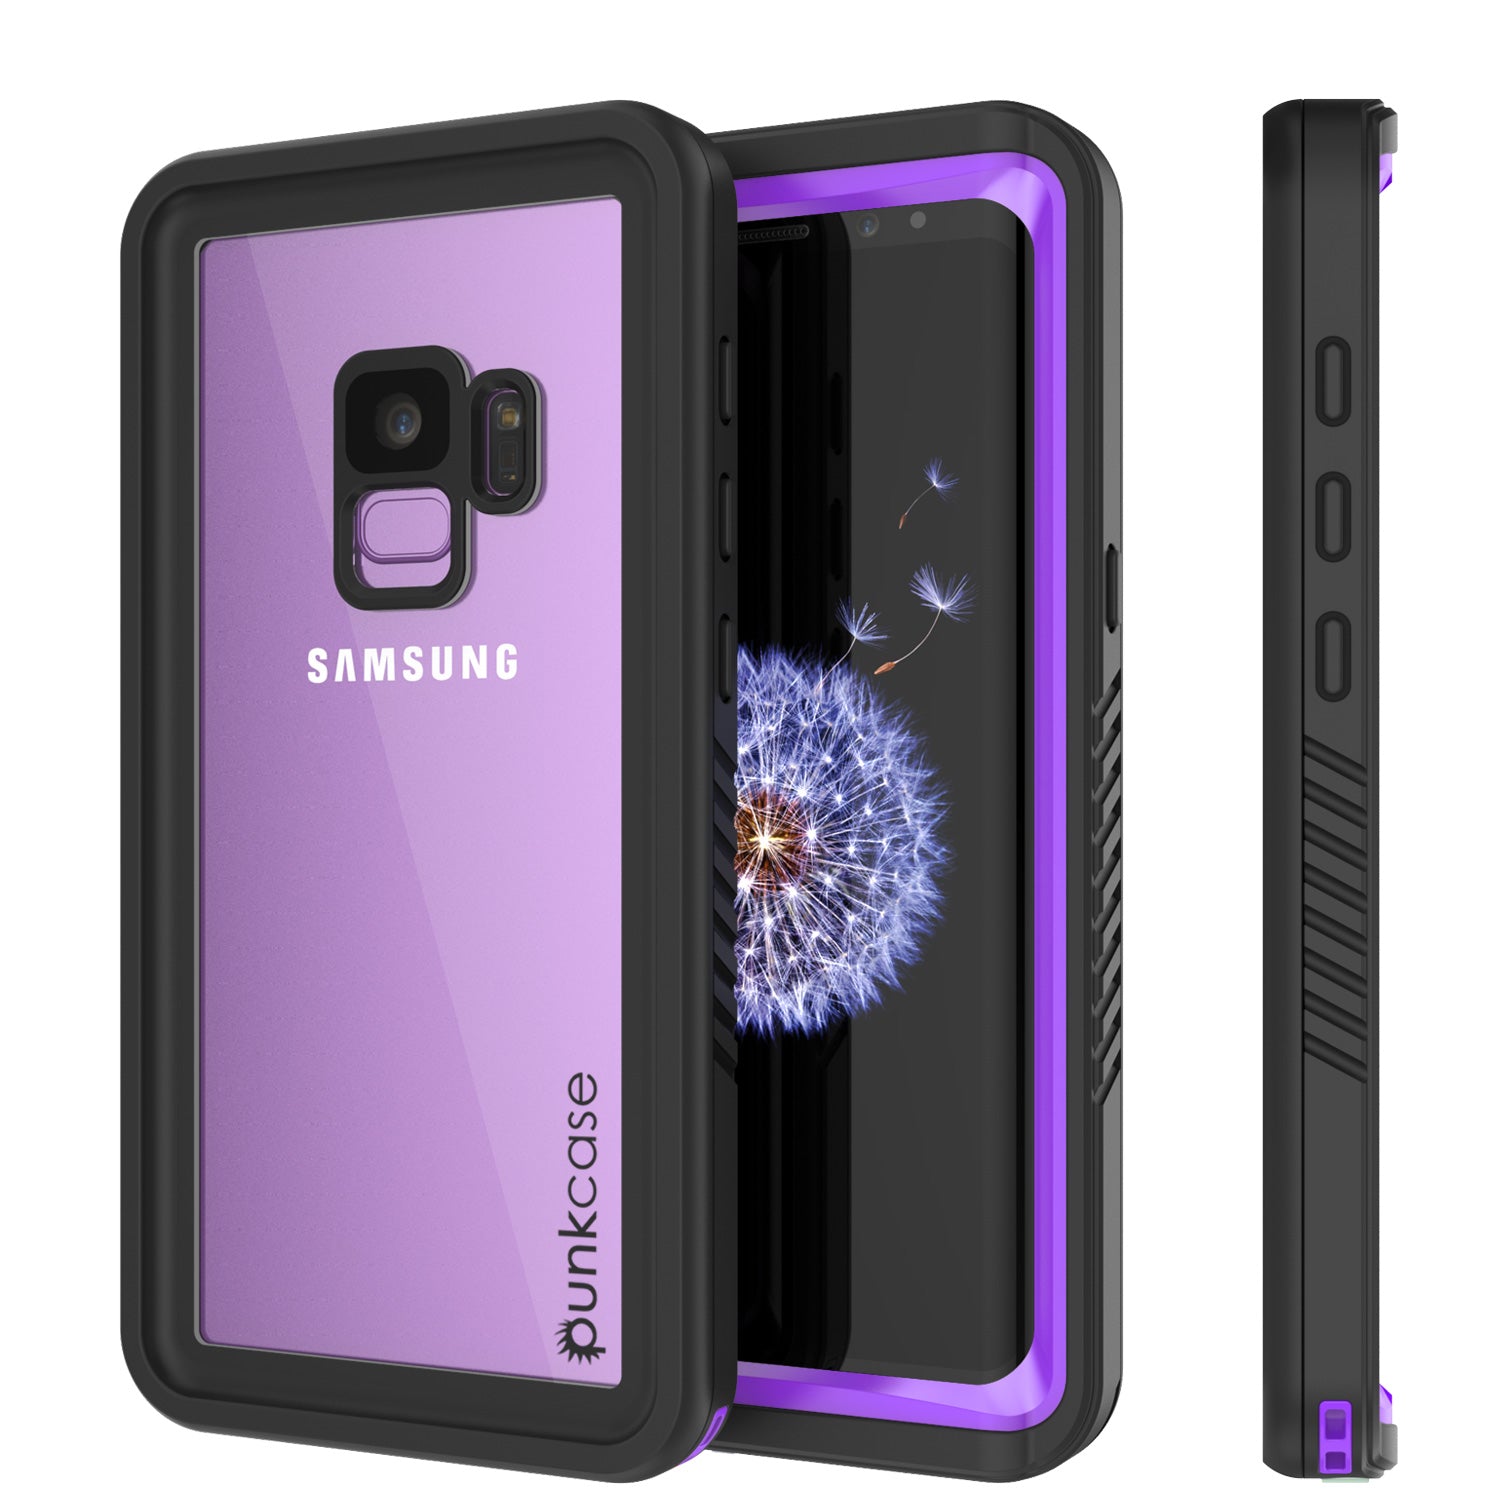 Galaxy S9 Waterproof Case, Punkcase [Extreme Series] [Slim Fit] [IP68 Certified] [Shockproof] [Snowproof] [Dirproof] Armor Cover W/ Built In Screen Protector for Samsung Galaxy S9 [Purple]